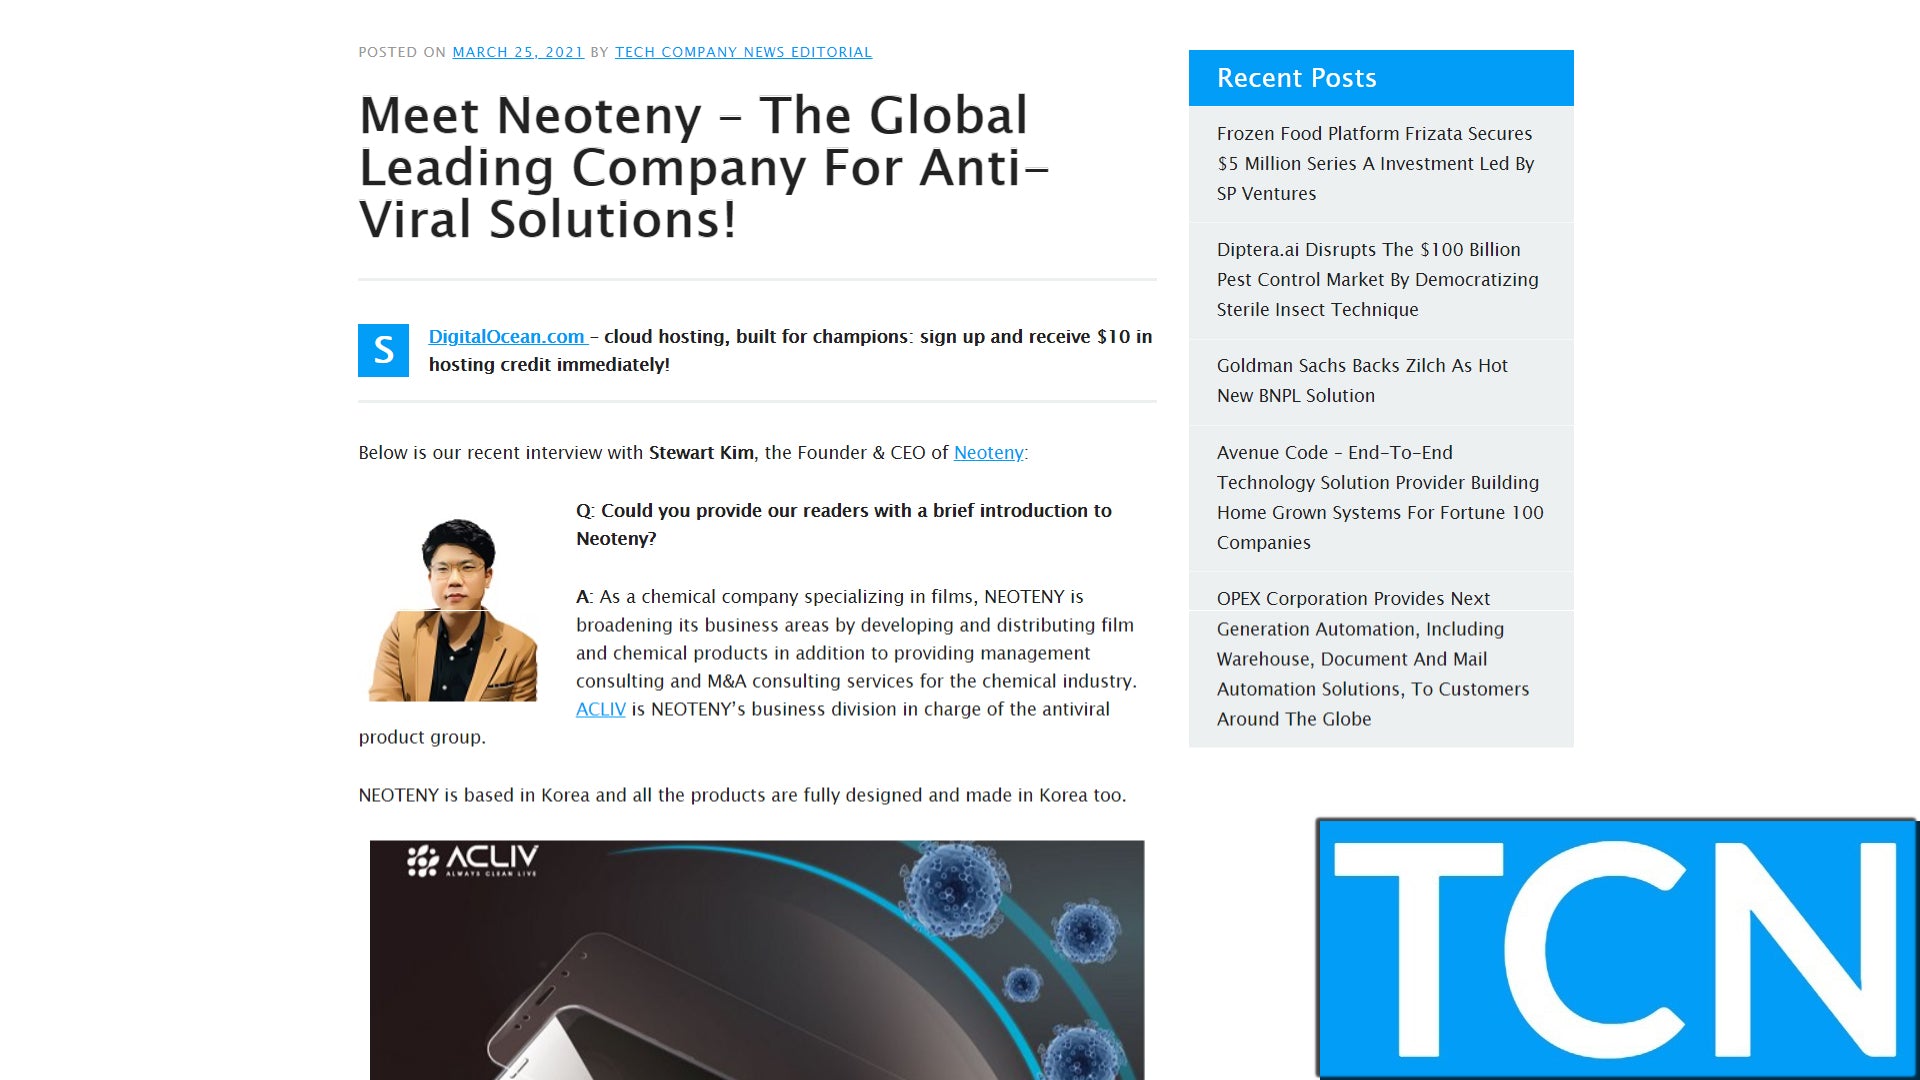 TechCompanyNews – "Meet Neoteny – The Global Leading Company For Anti-Viral Solutions!"